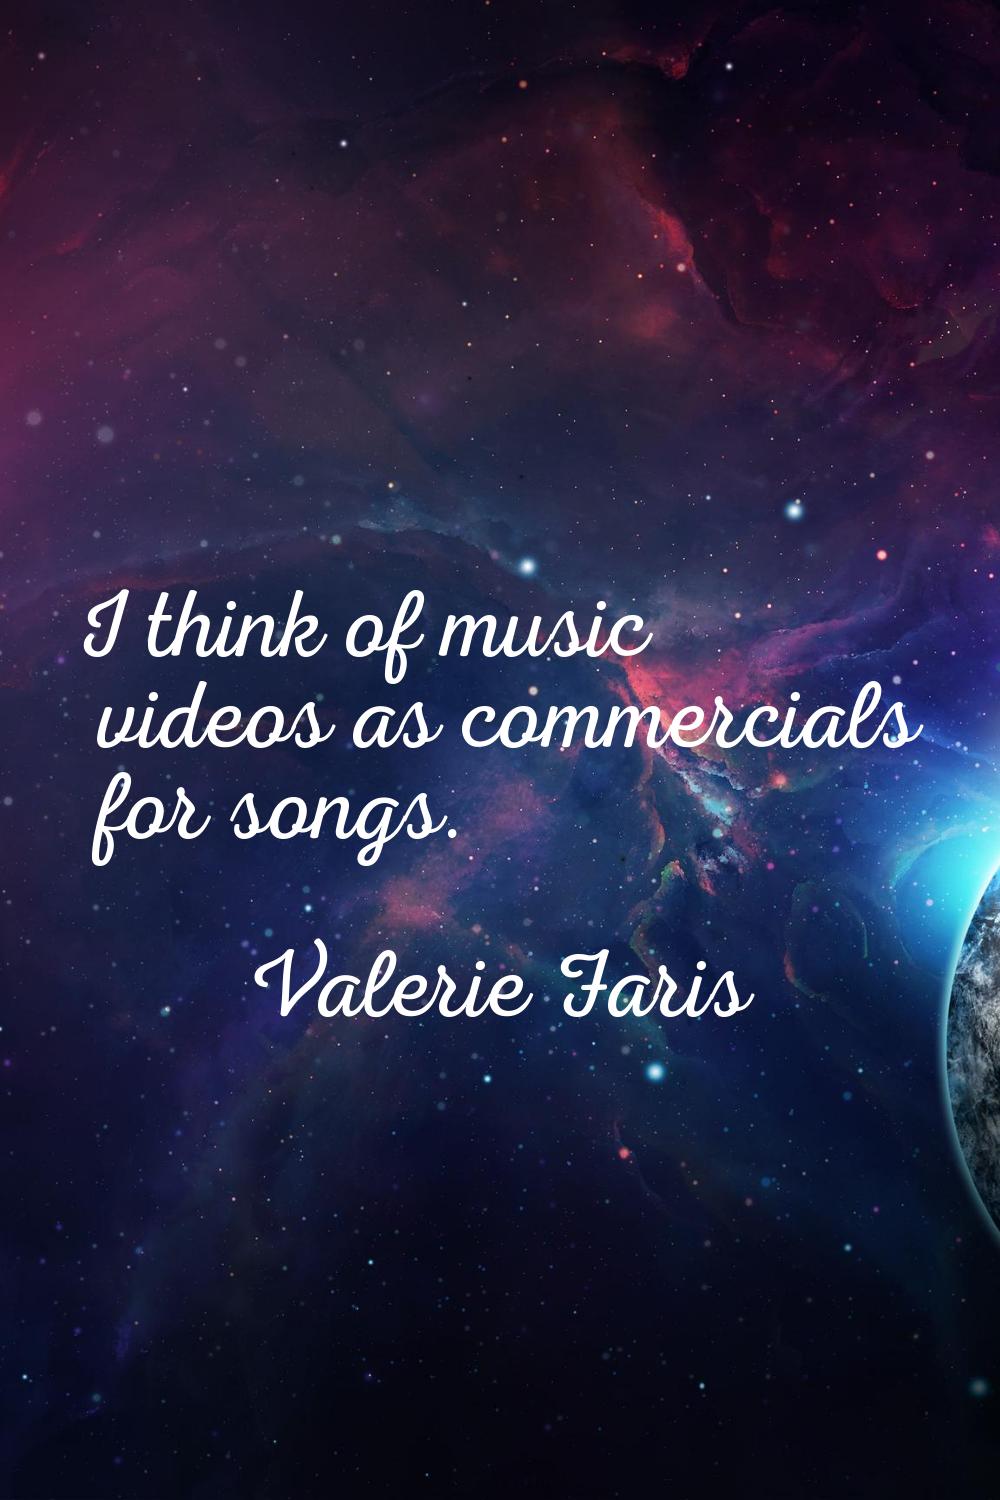 I think of music videos as commercials for songs.